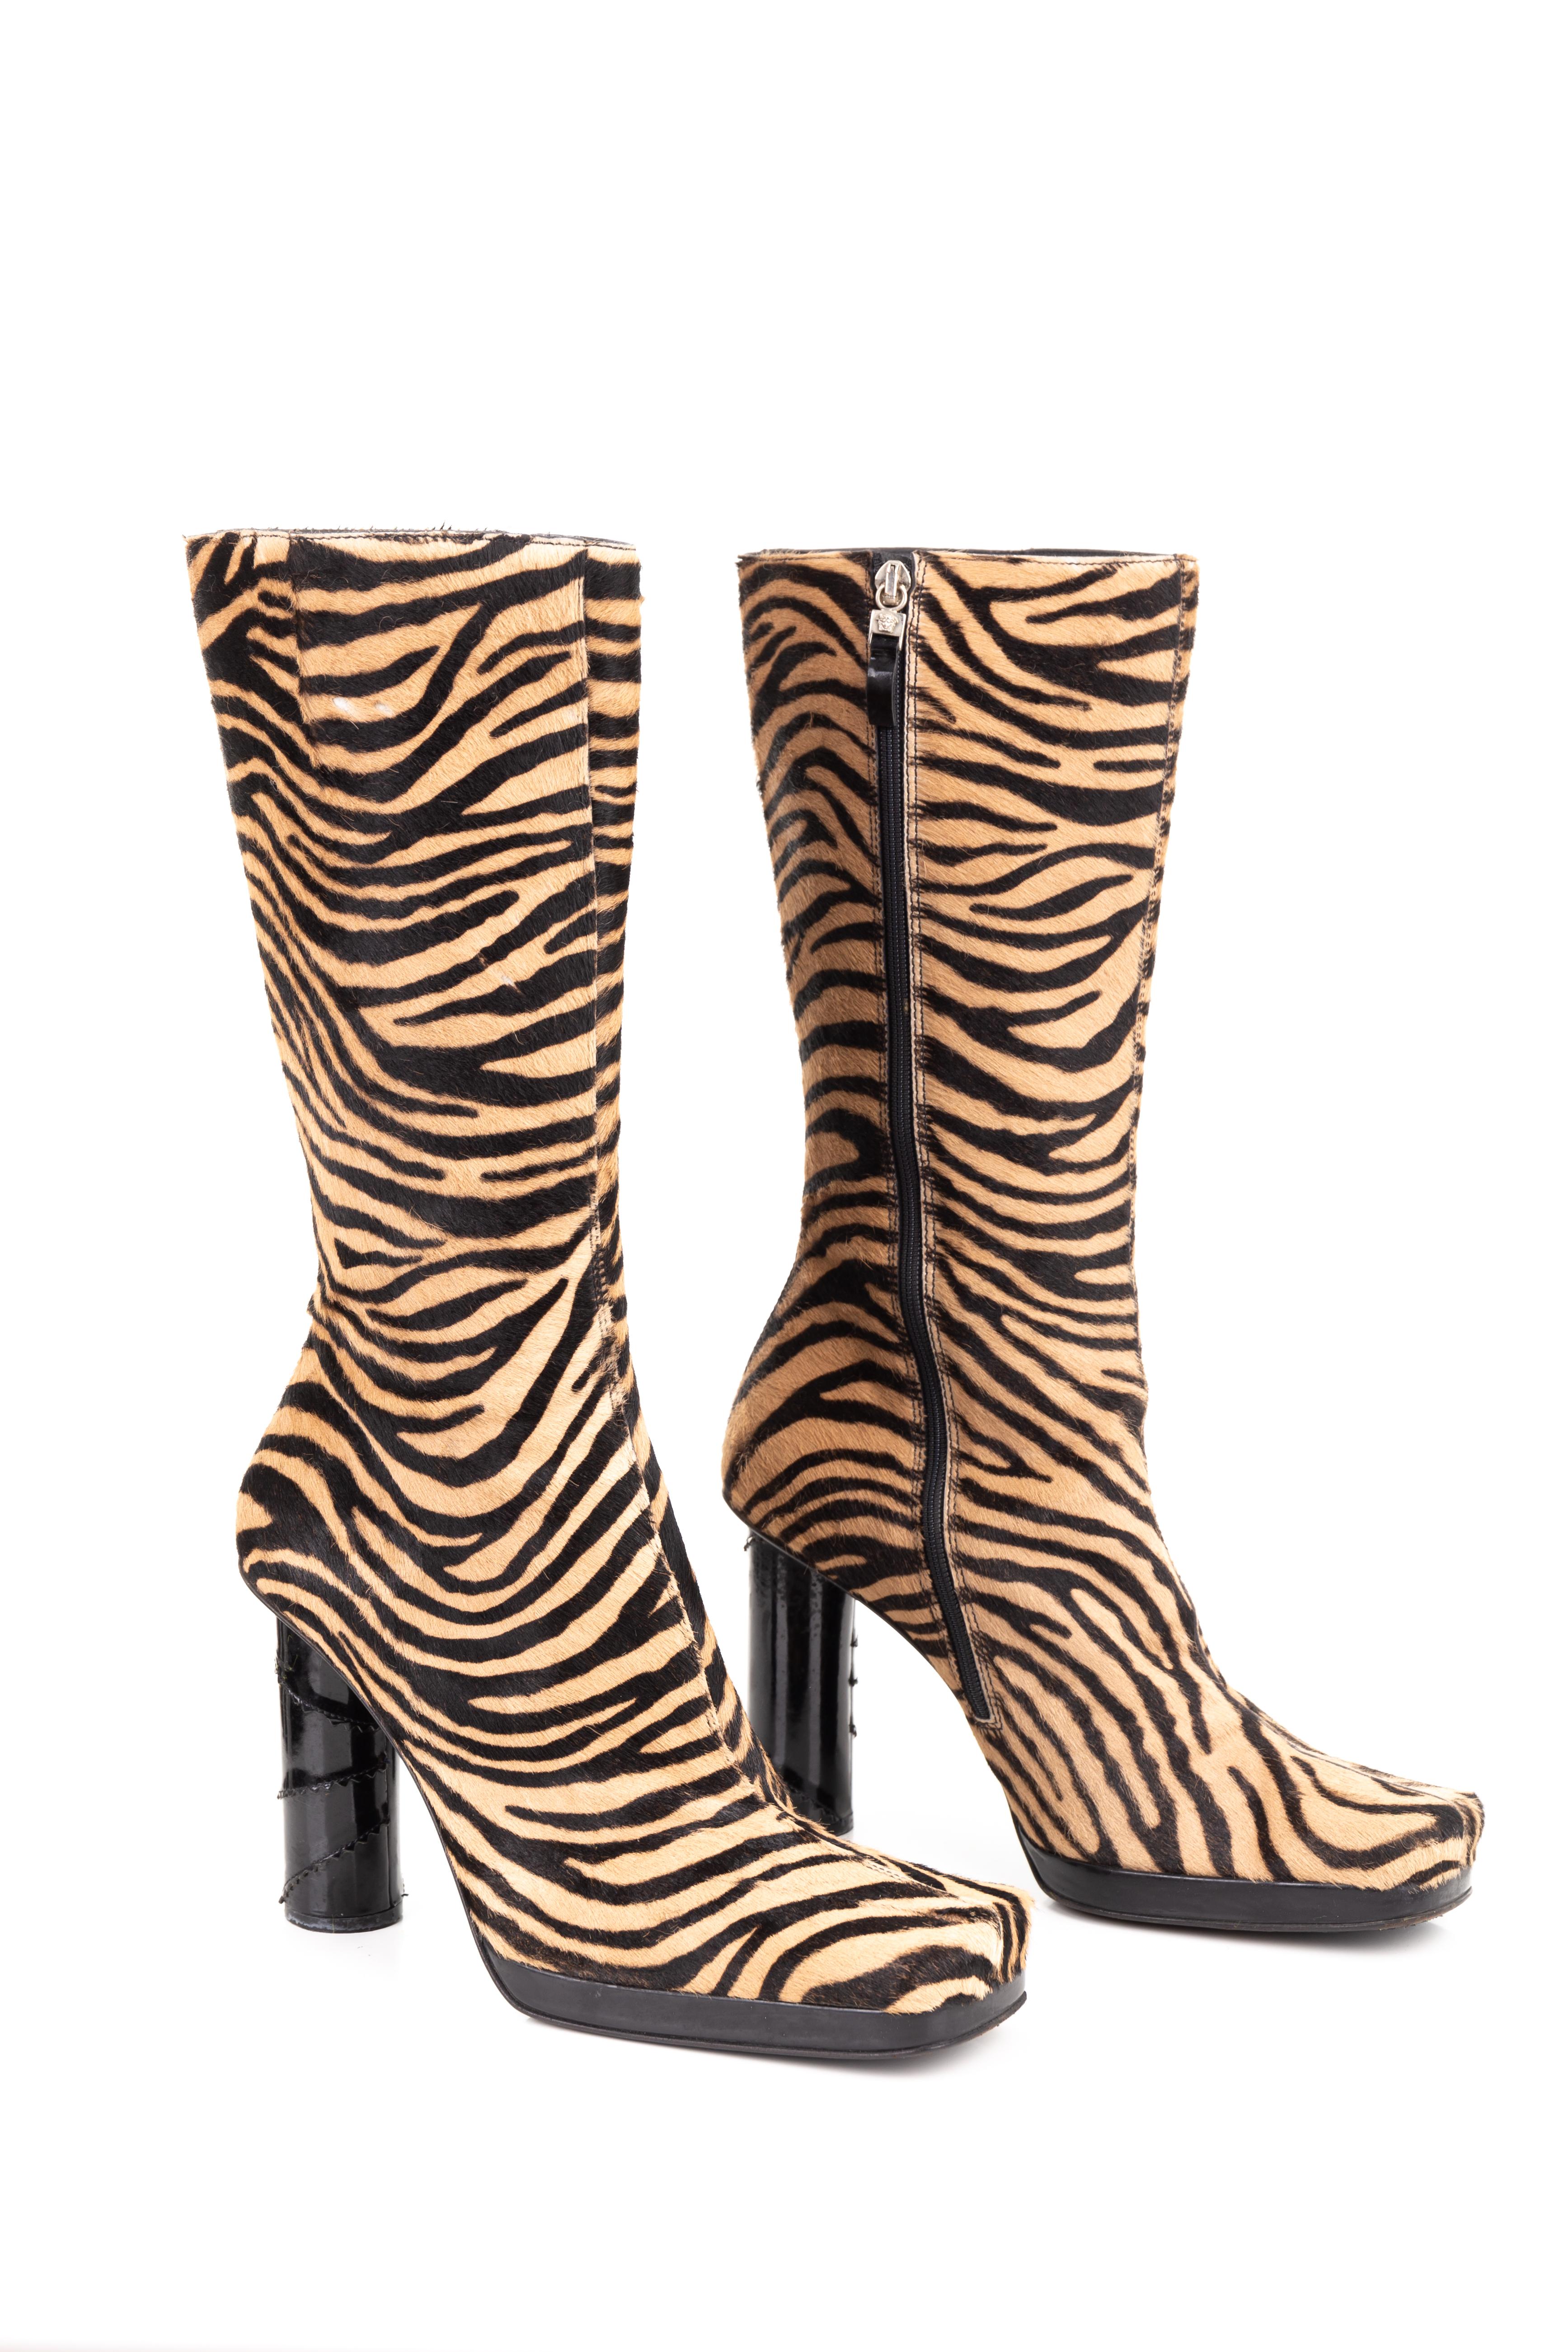 Versace by Donatella Versace F/W 1999 Zebra calfskin platform boots In Excellent Condition For Sale In Rome, IT